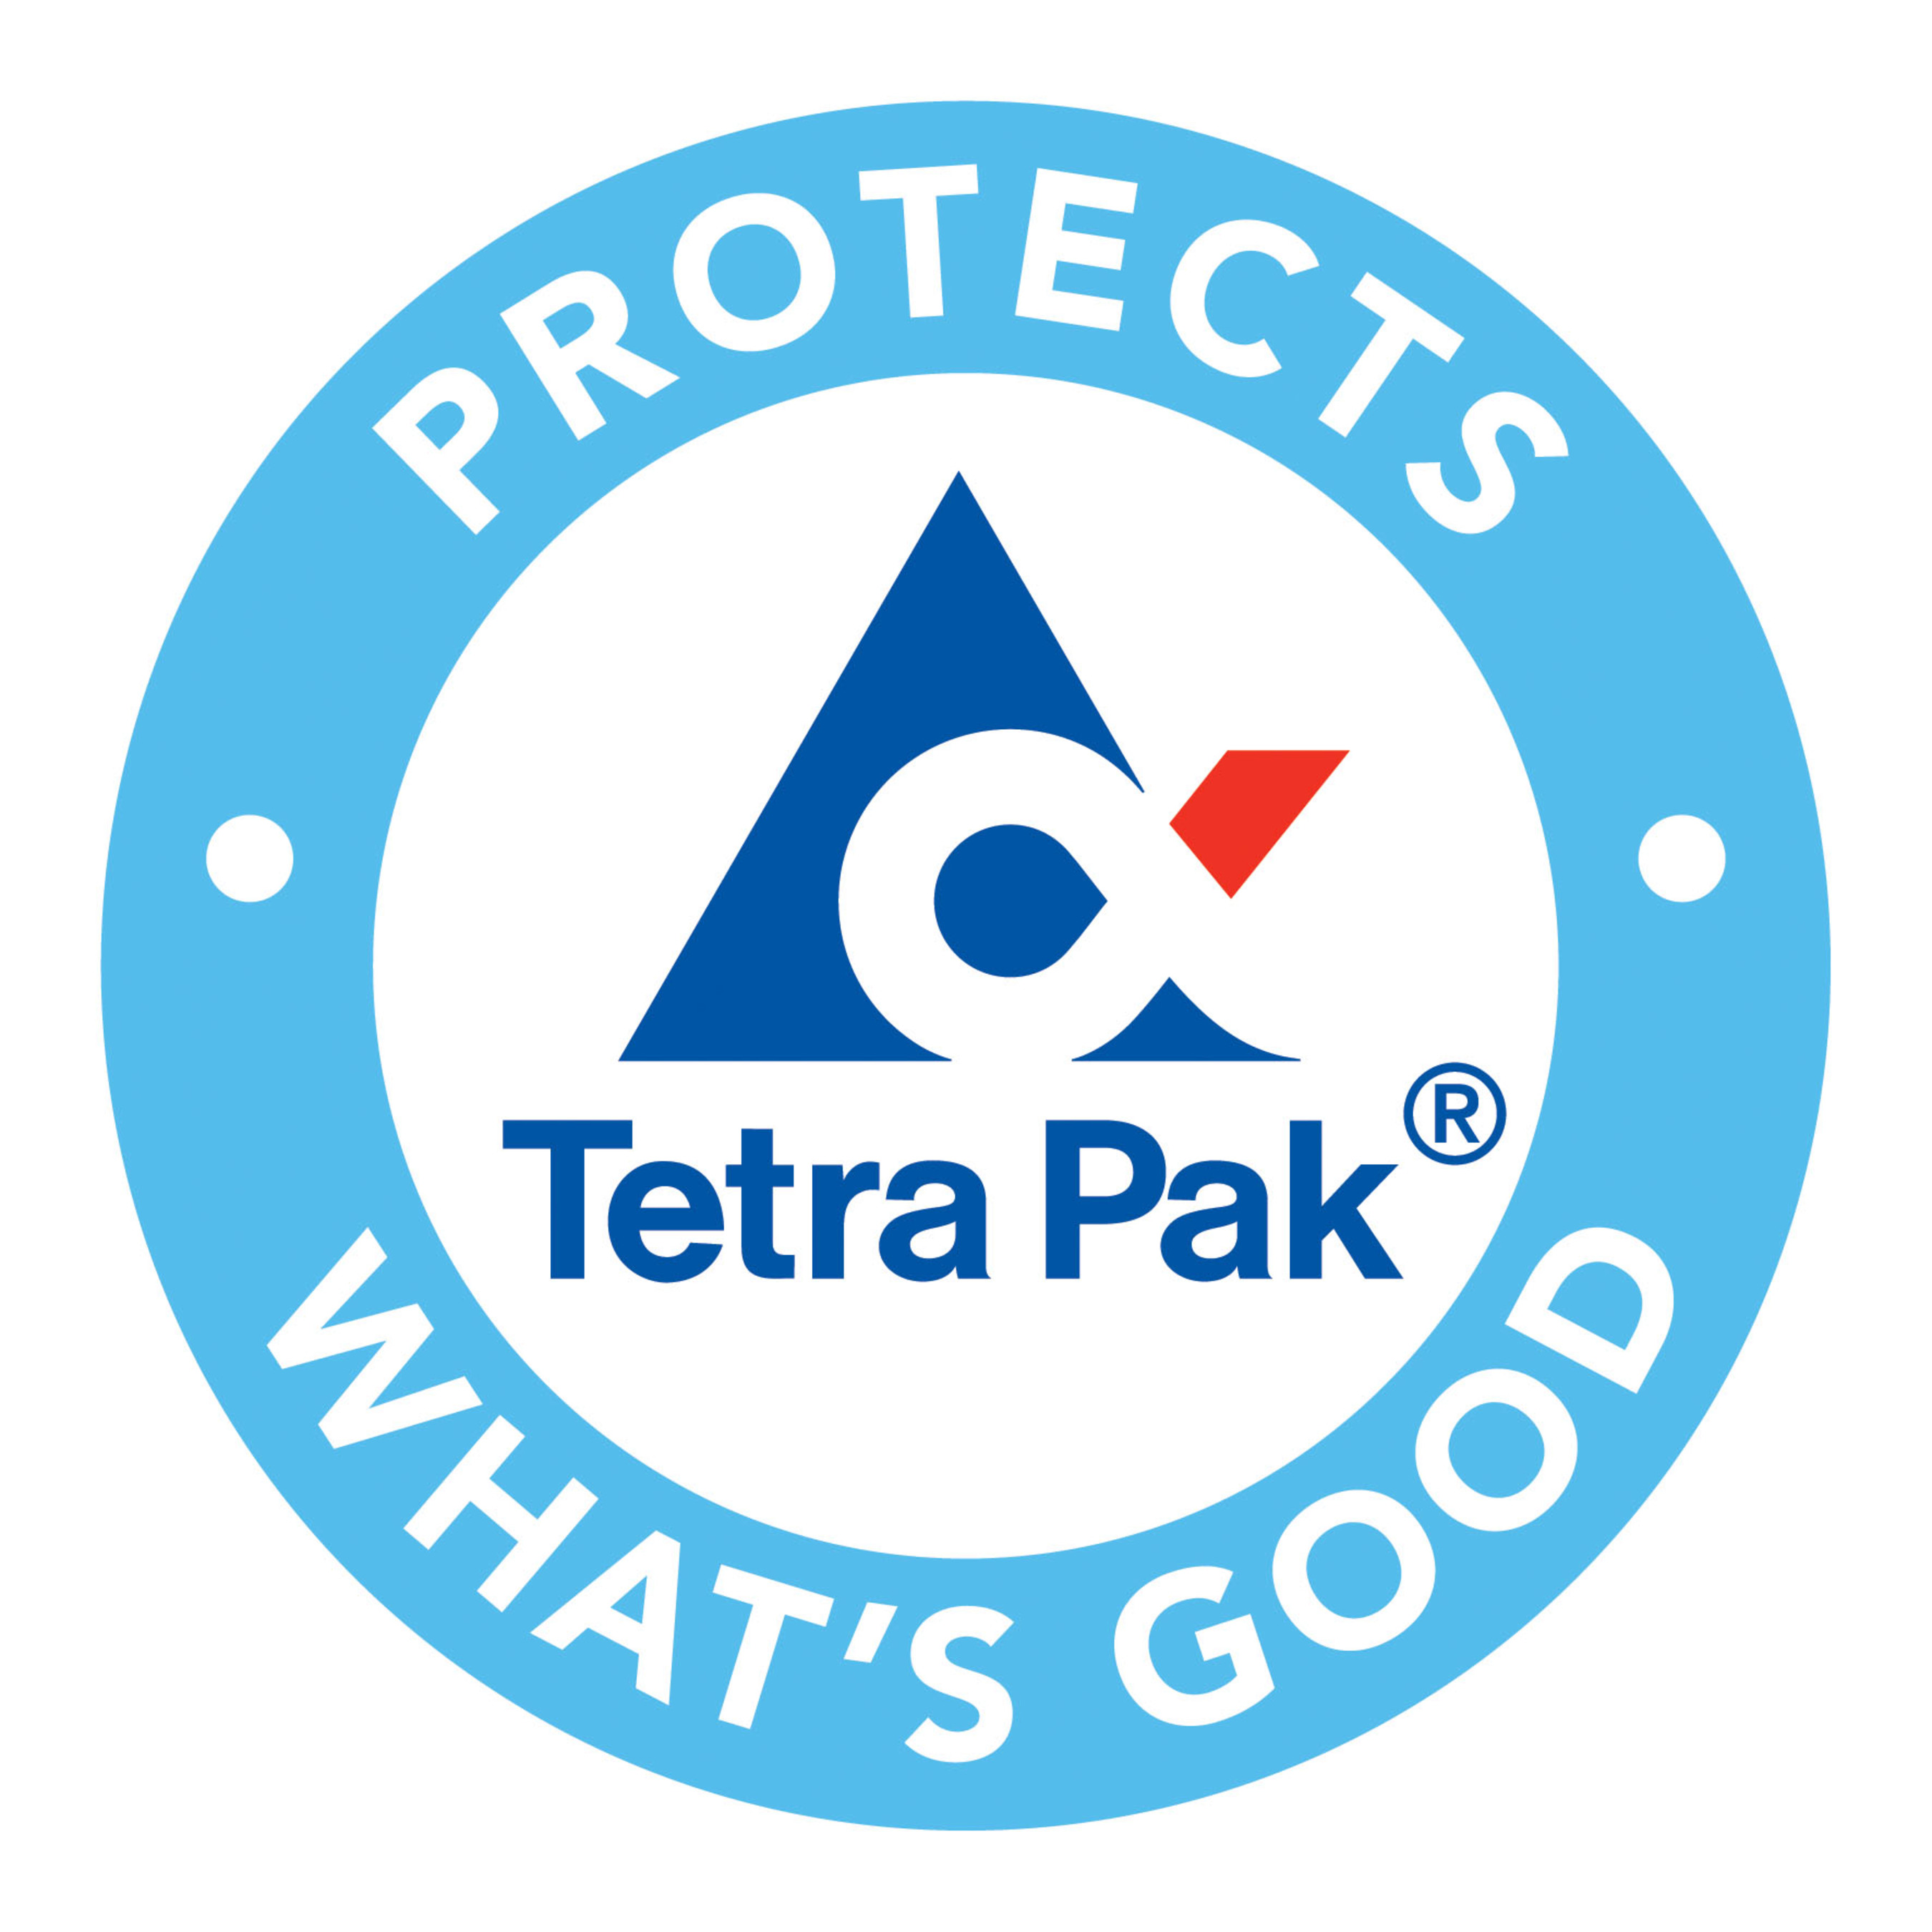 Tetra Pak is the world's leading food processing and packaging solutions company. Working closely with our customers and suppliers, we provide safe, innovative and environmentally sound products that each day meet the needs of hundreds of millions of people in more than 170 countries around the world. With more than 23,000 employees based in over 80 countries, we believe in responsible industry leadership and a sustainable approach to business. Our motto, "PROTECTS WHAT'S GOOD(tm)," reflects our vision to make food safe and available, everywhere.